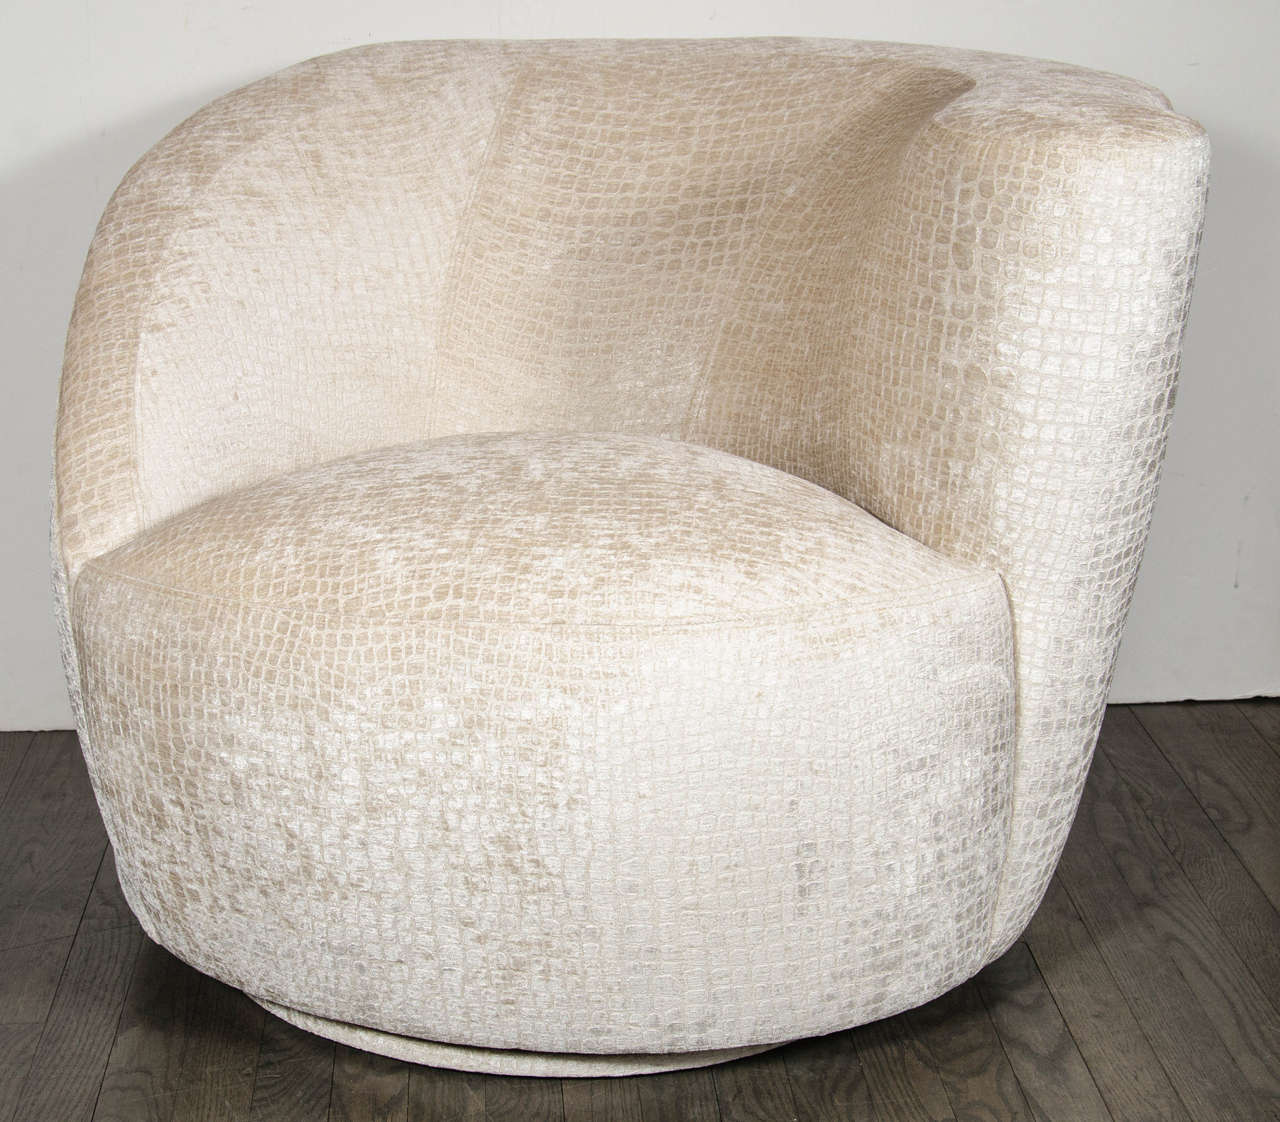 Sculptural pair of Mid-Century Nautilus swivel chairs by Vladimir Kagan. This pair of swivel chairs by Vladimir Kagan features a sculptural, asymmetrical design that starts at the top of the chairs slight scroll arm design then follows the sloping